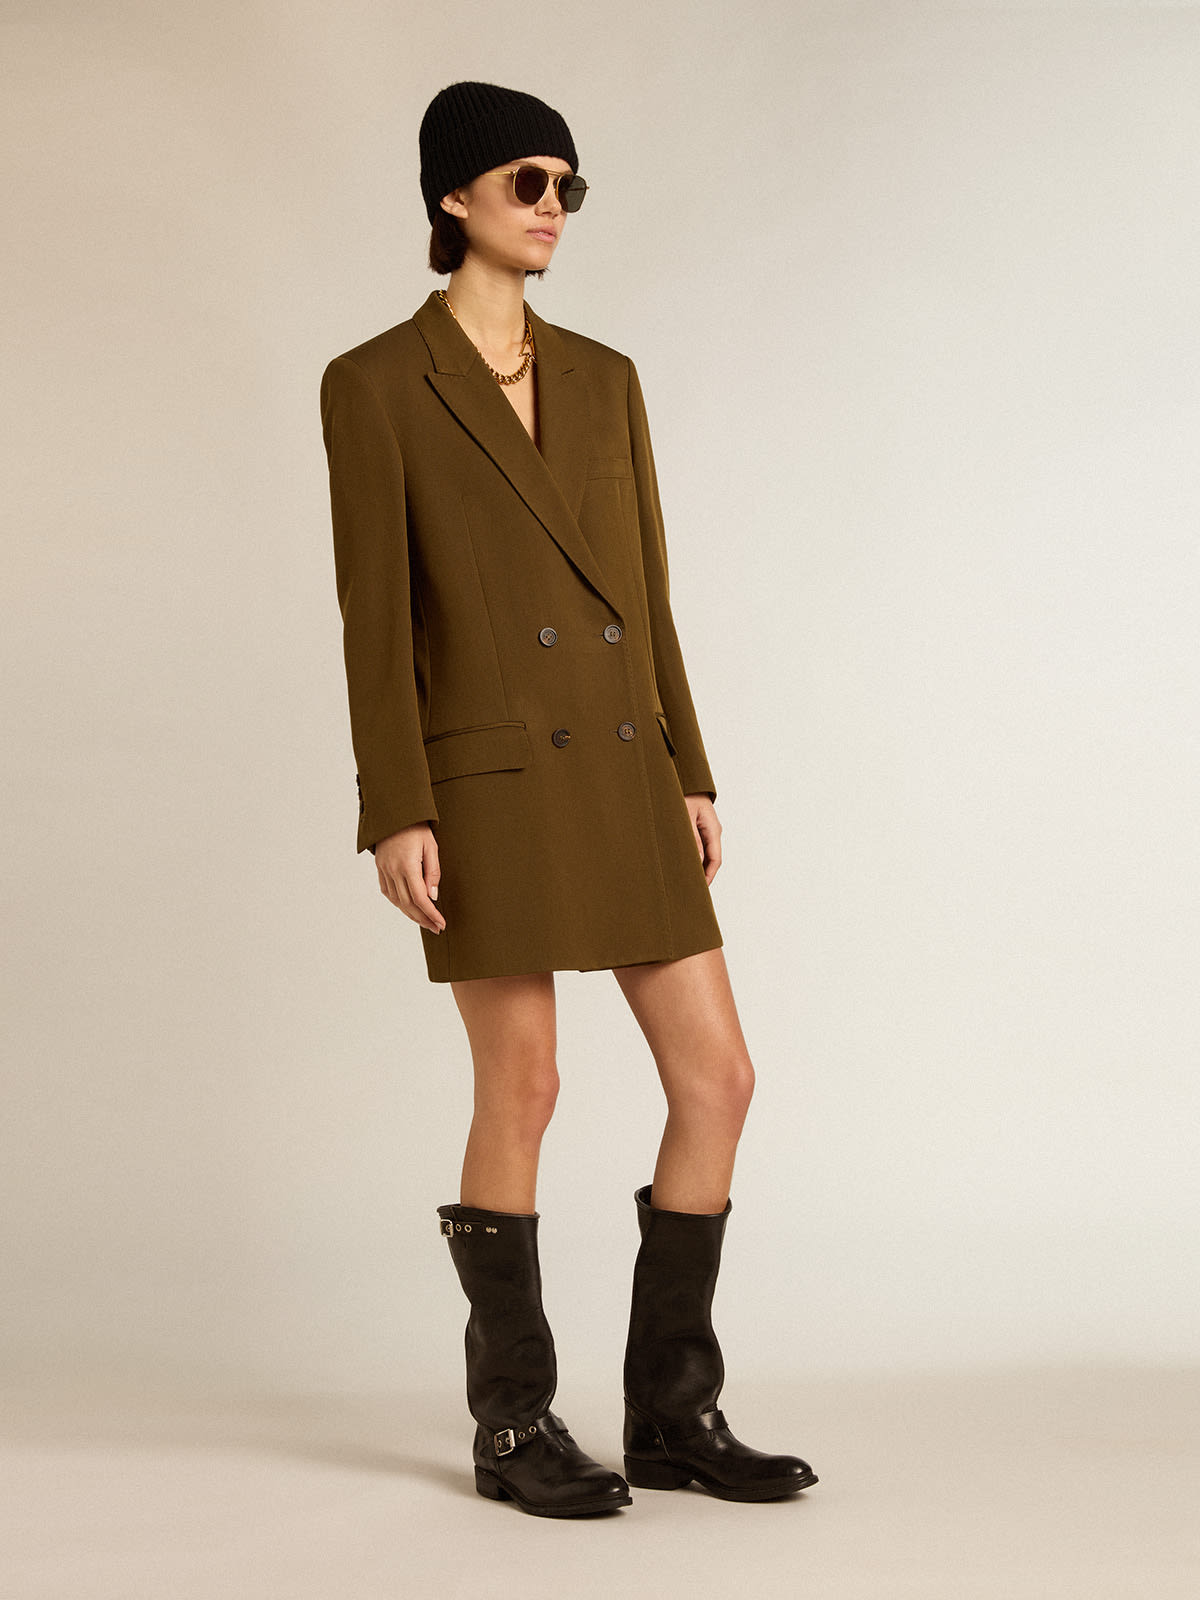 Golden Goose - Short dress in beech-colored wool with horn buttons in 